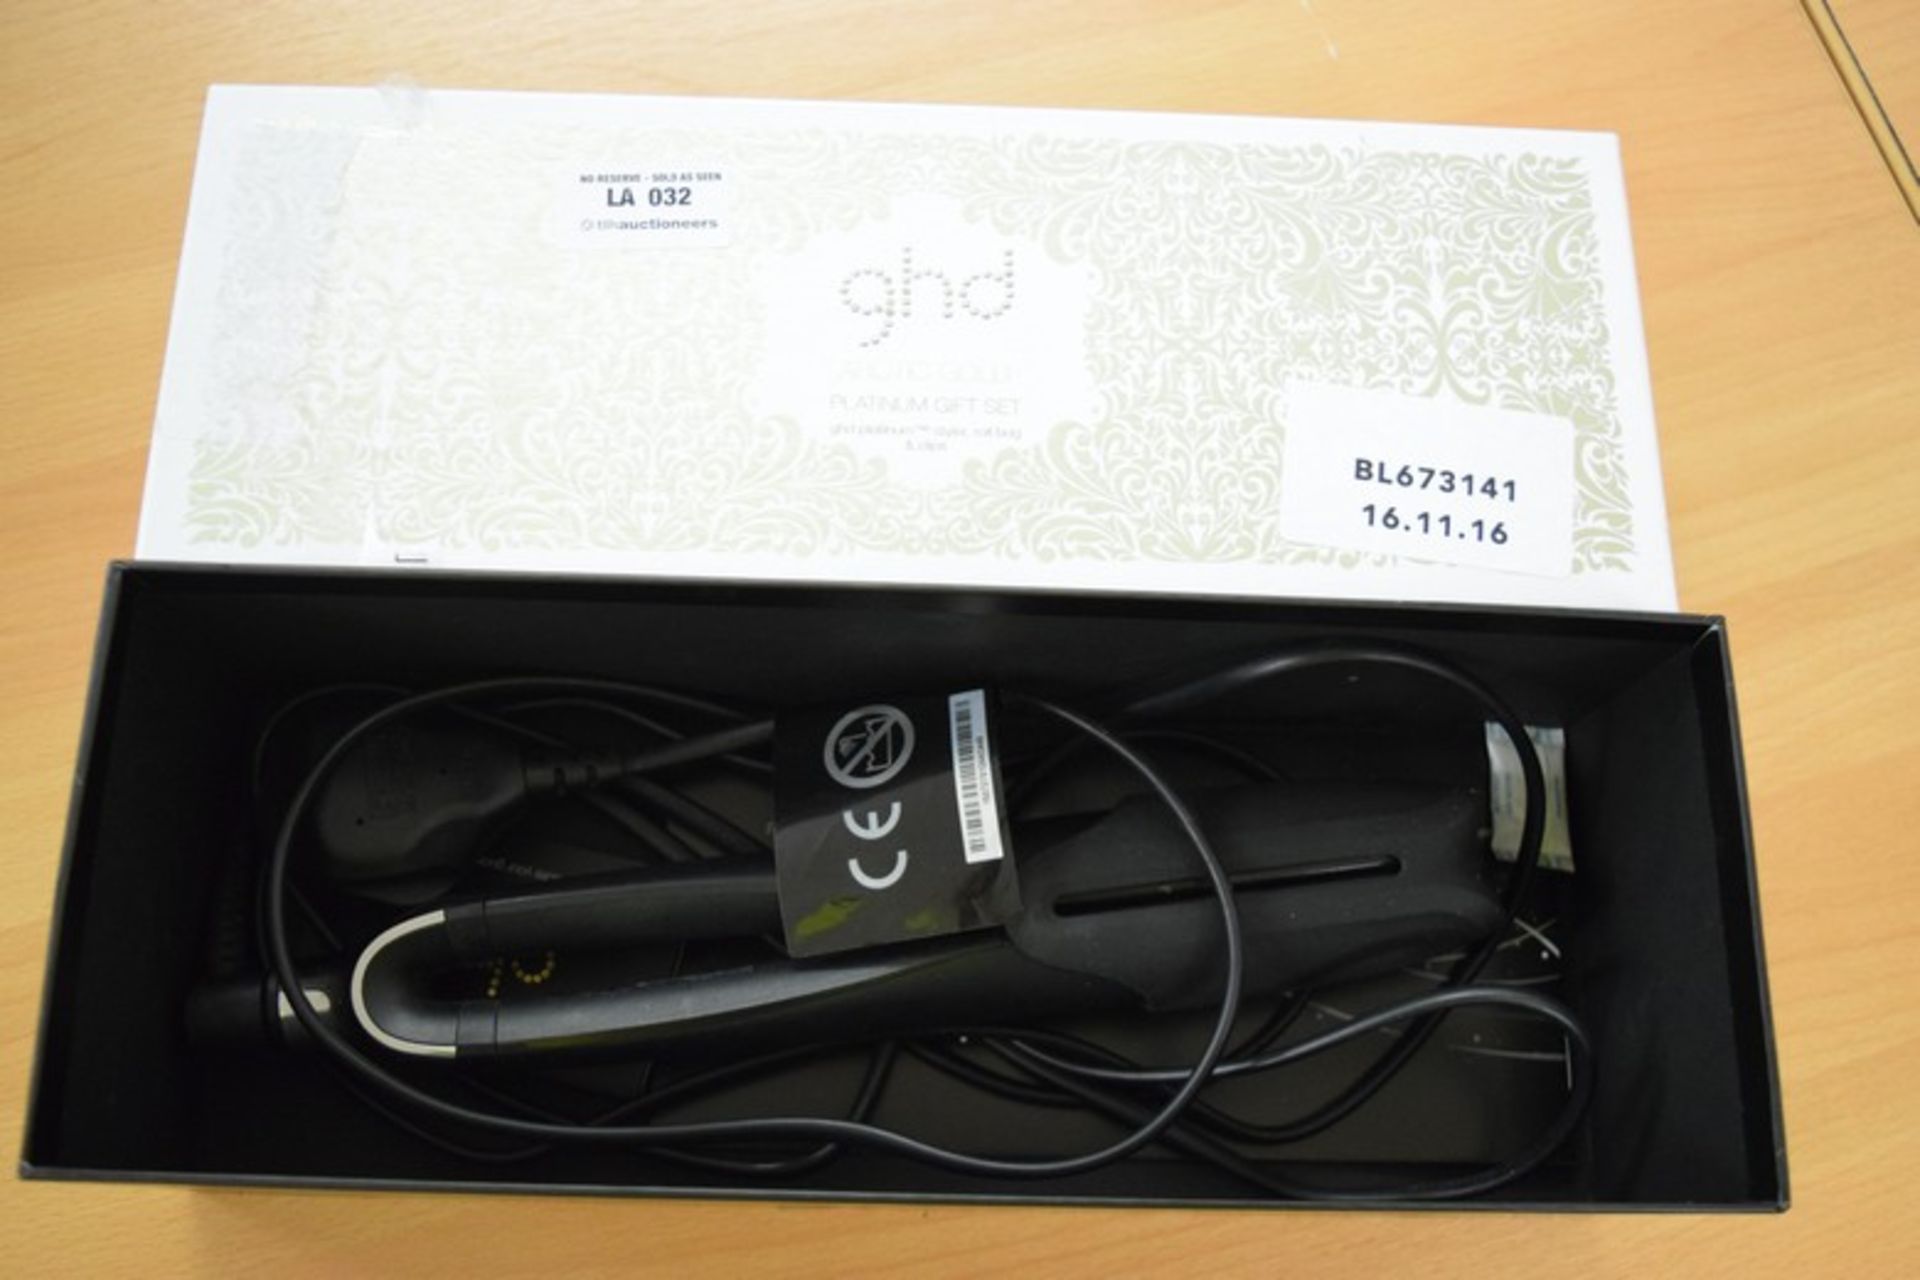 1 x BOXED PAIR OF GHD ARTIC GOLD HAIR STRAIGHTENERS RRP £145 16/11/16 *PLEASE NOTE THAT THE BID